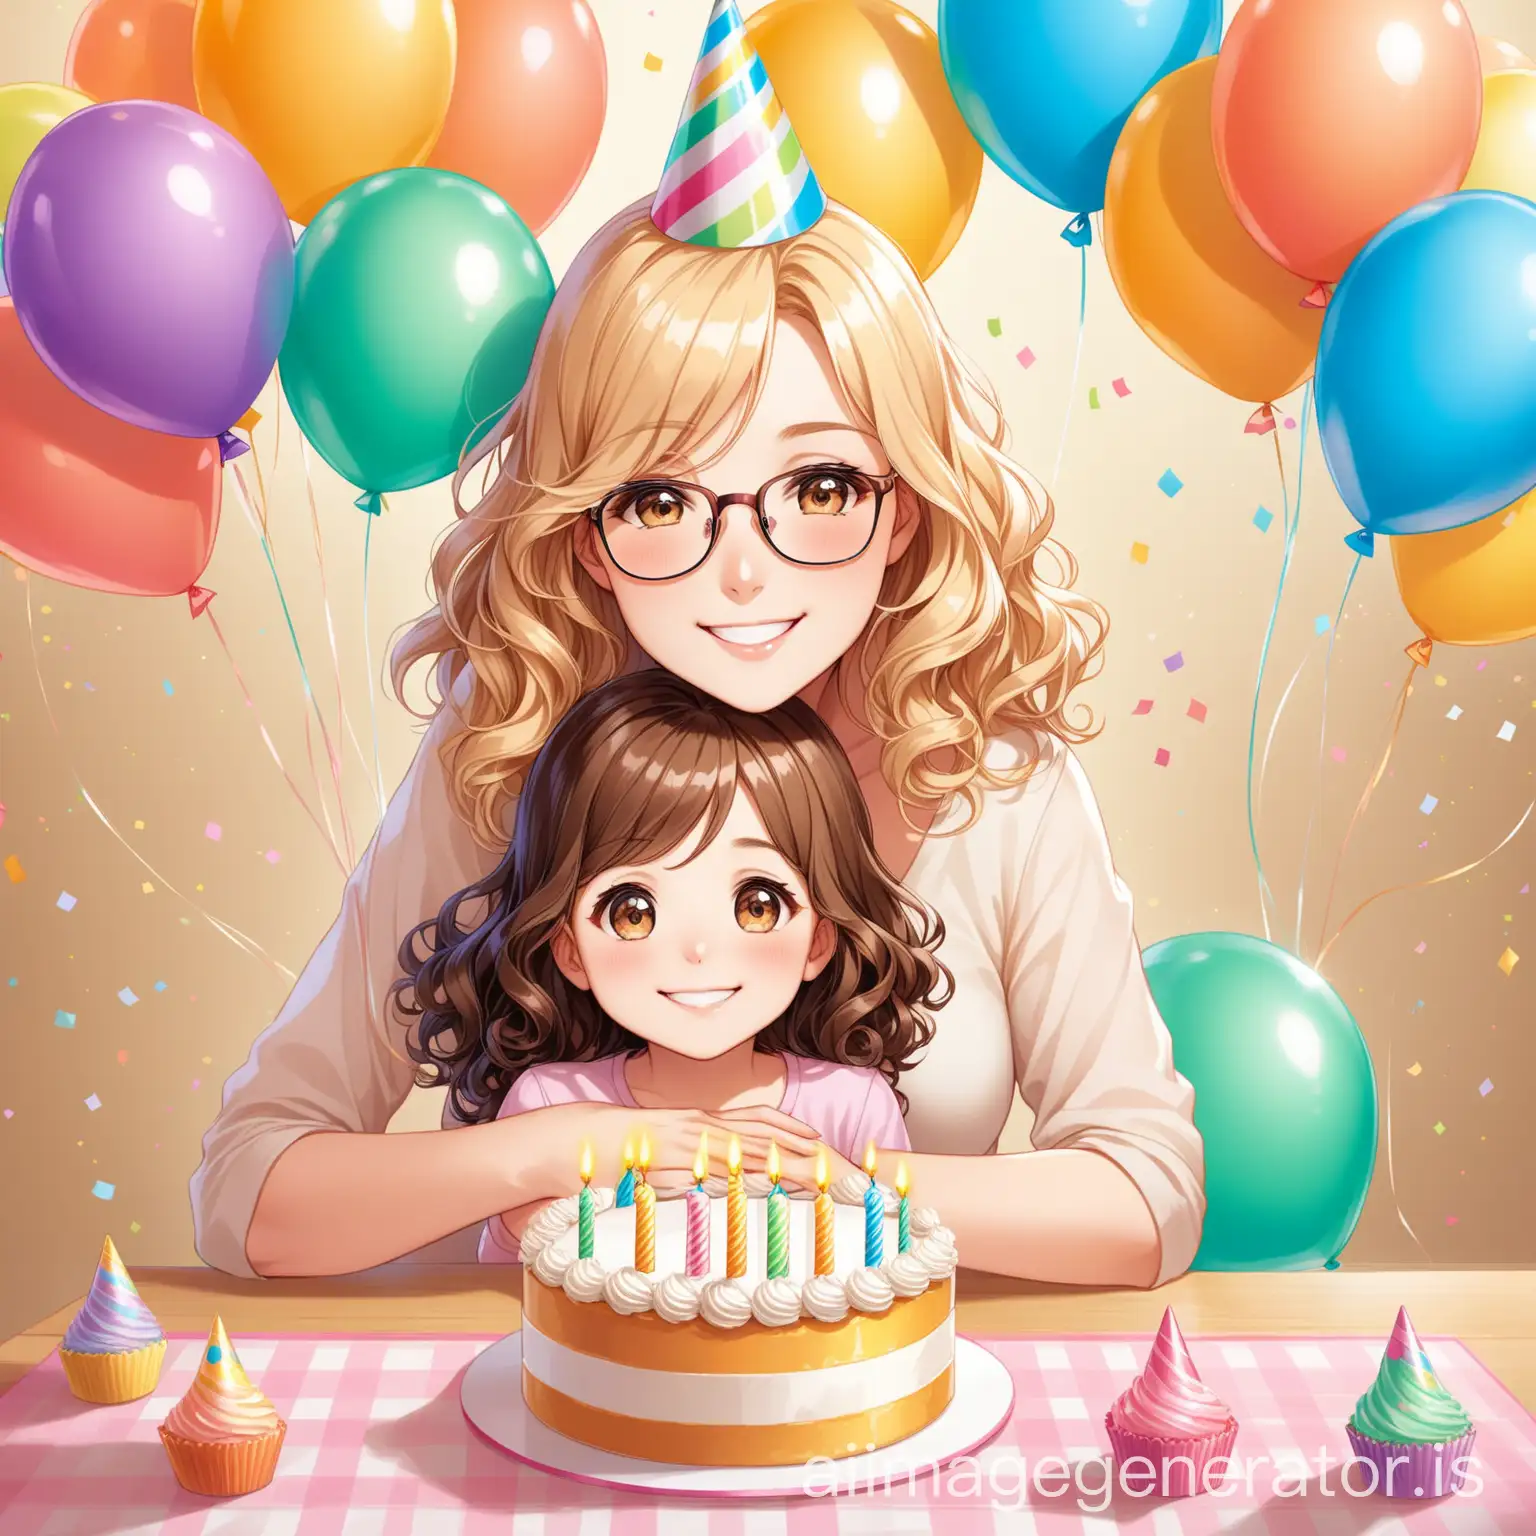 A mother hugging her daughter and they are wearing party hats, and there is some balloons upon their head, they are smiling and looking at the camera, it is mother`s birthday, the cake is on a table in front of them, they are happy. the mother has curly medium blond hair and the daughter has glasses and medium dark brown wavy hair.